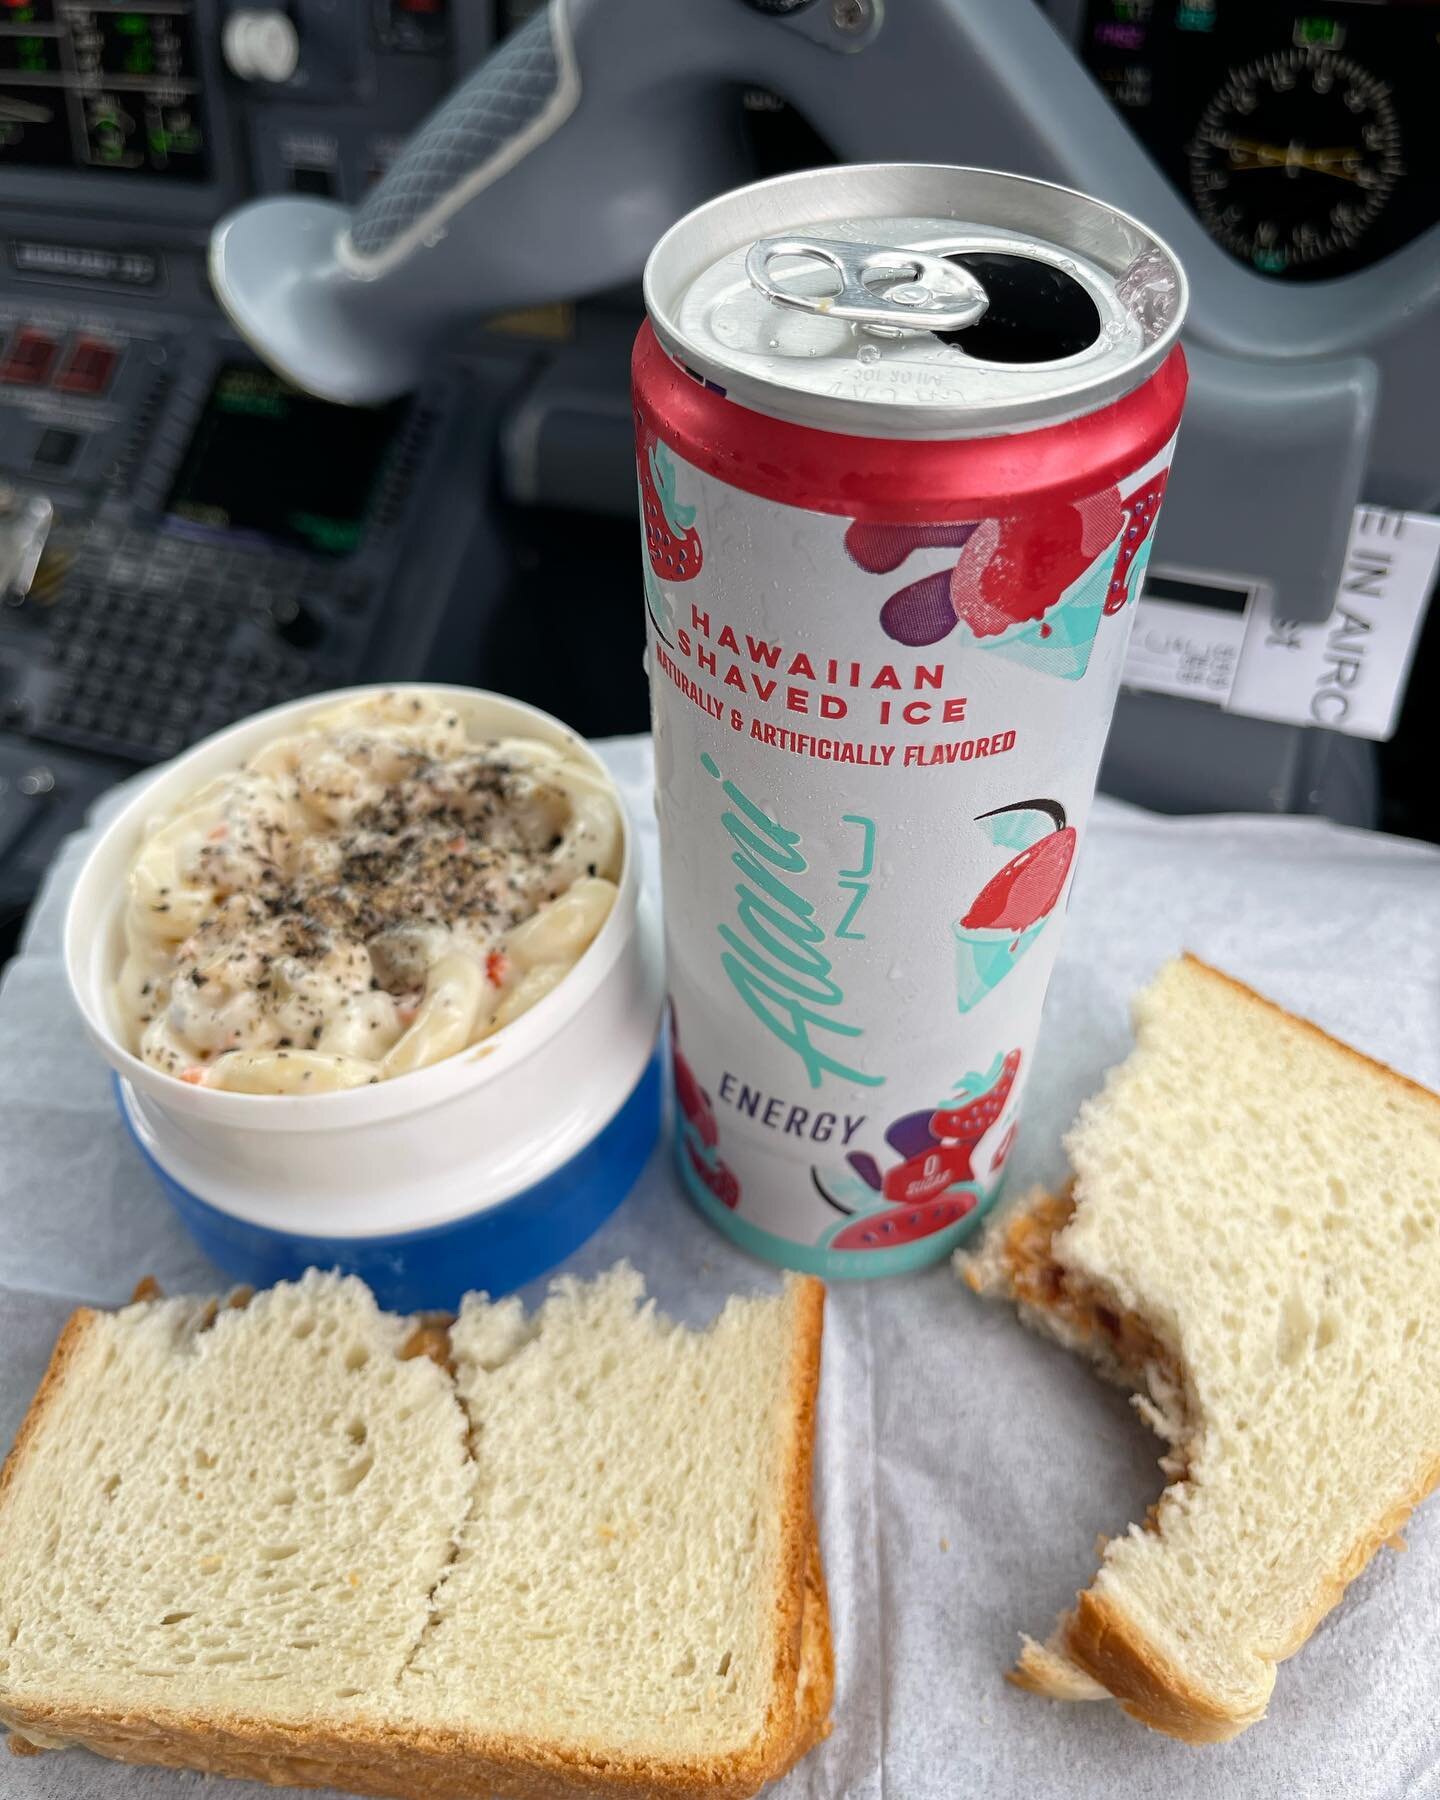 @alaninutrition keeping me going to get my passengers to where they have to go. We don&rsquo;t get &ldquo;normal&rdquo; lunch breaks so we have to try and stay healthy and eat right when we can and your products do just that.
#pilotlife #airlinepilot